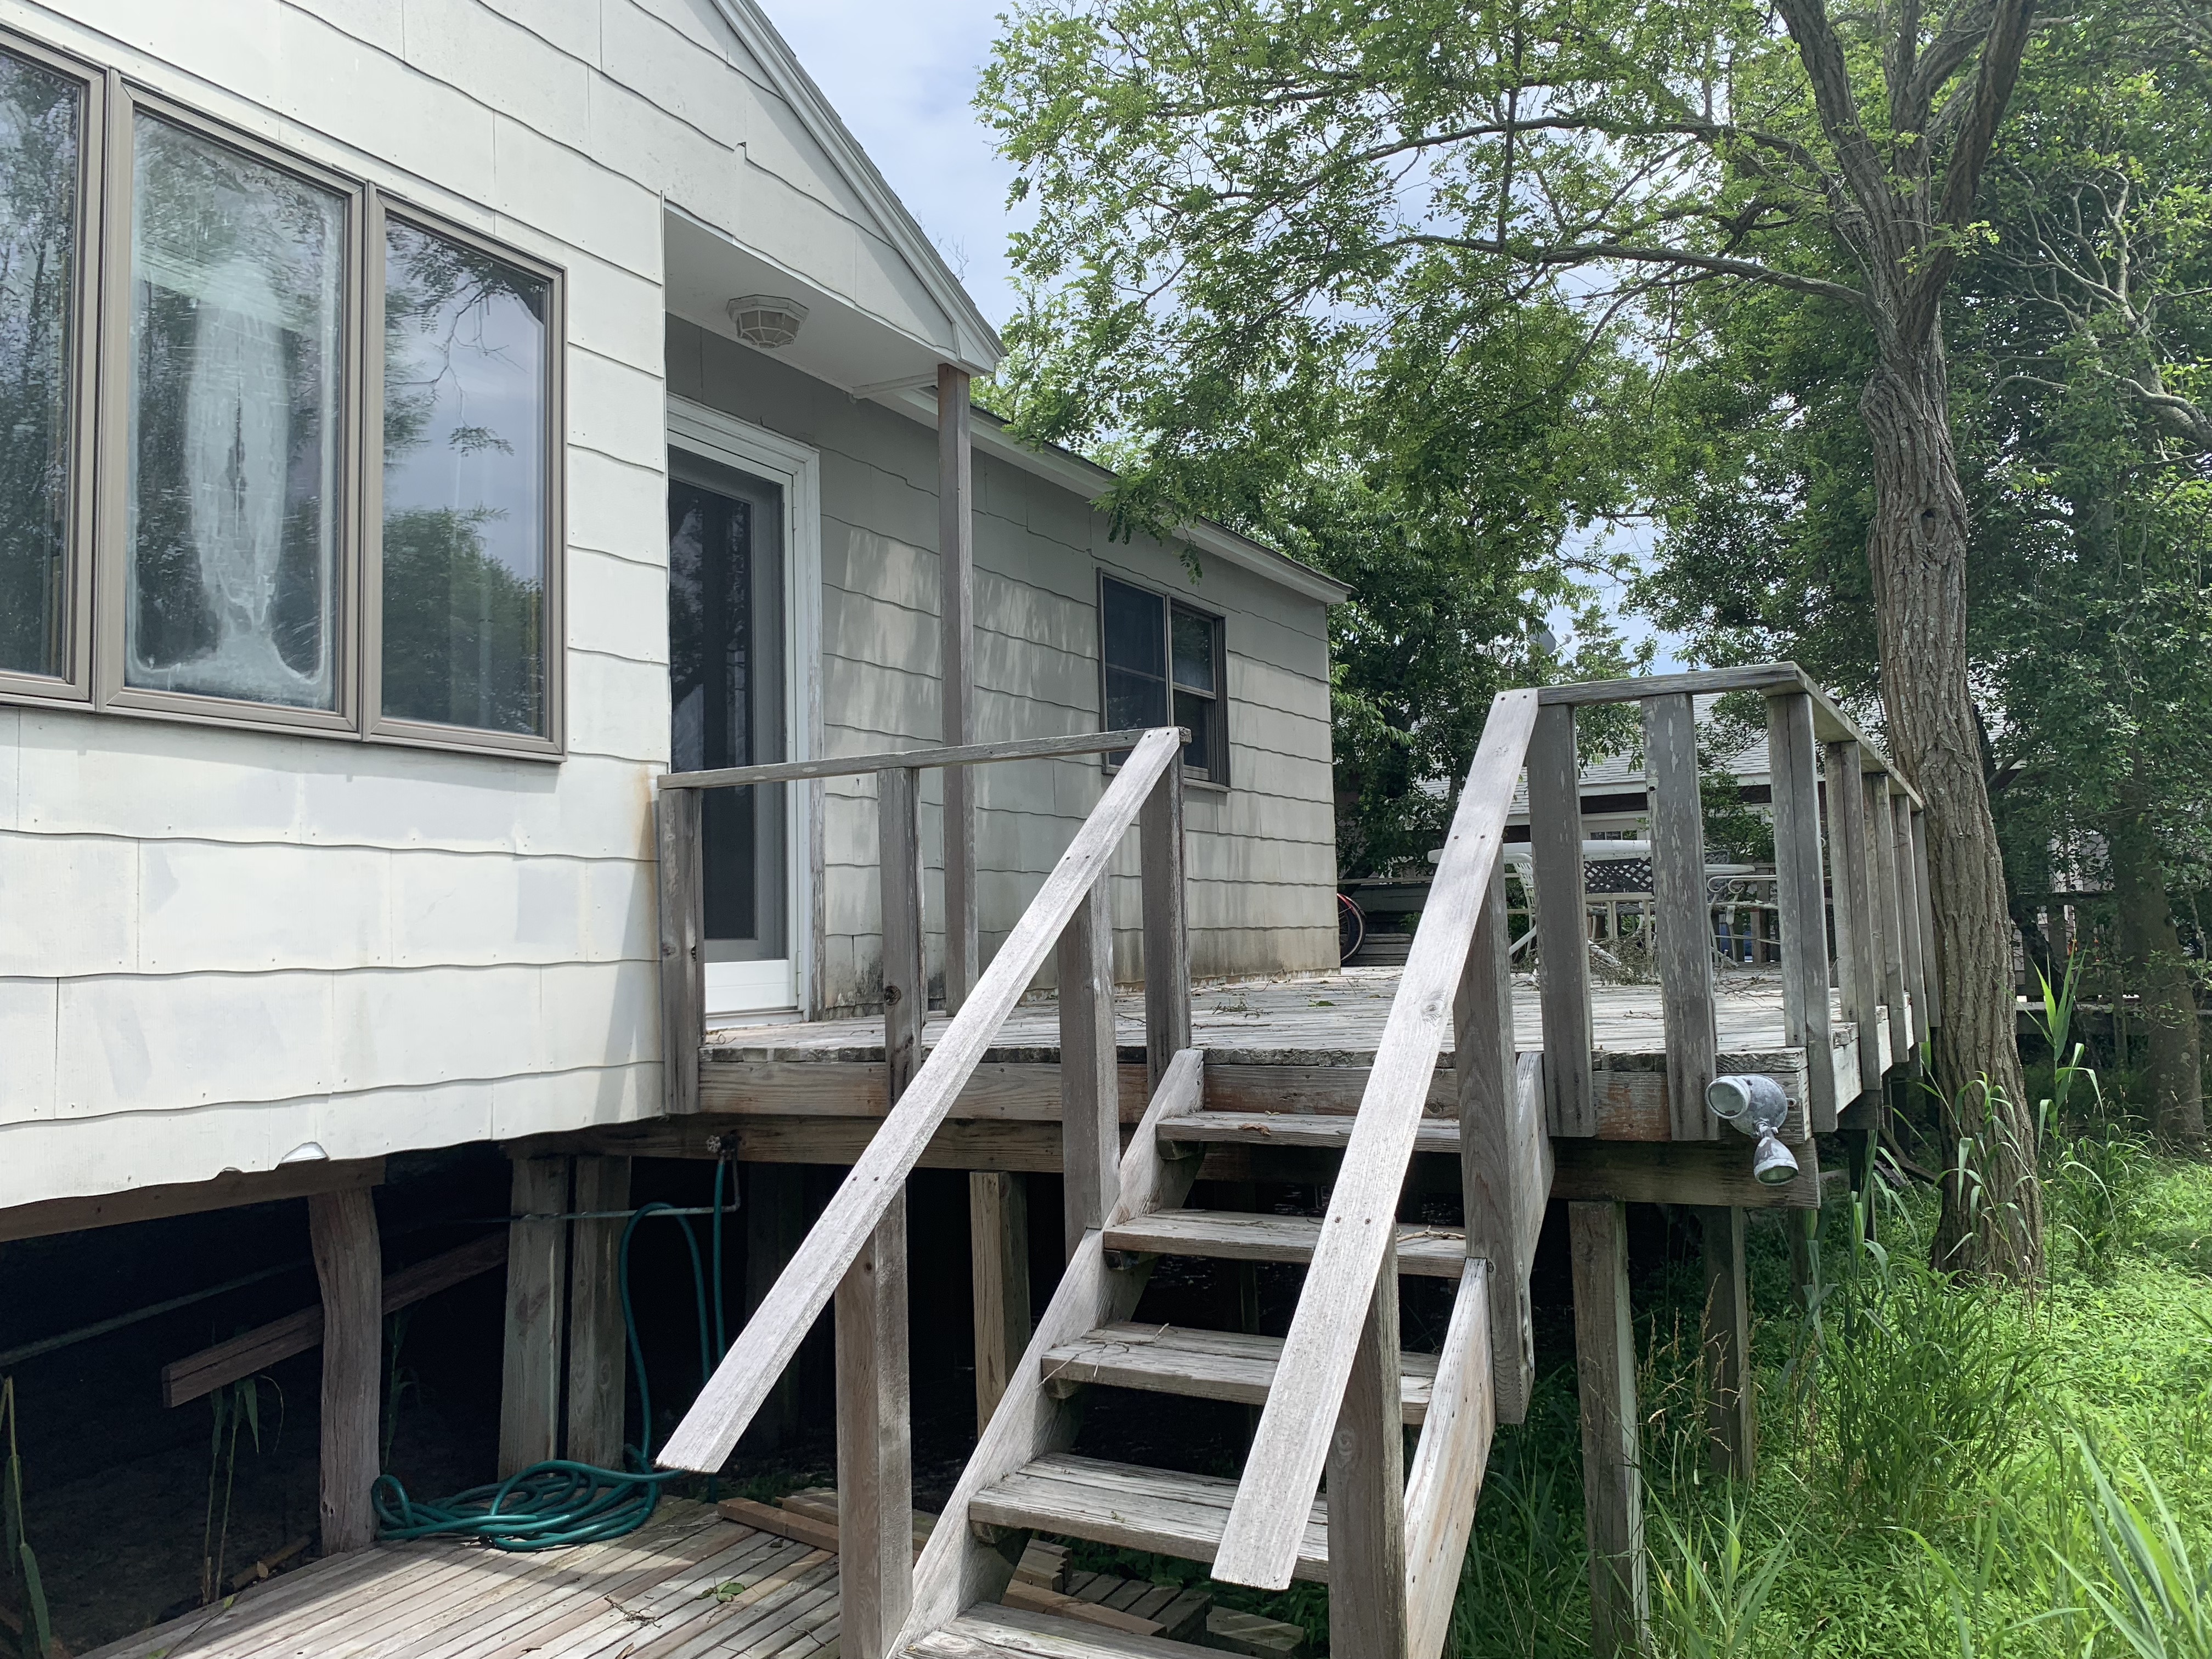 Amazing opportunity!  This charming, elevated 2 bedroom cottage sits on an oversized 75' X 100' lot.  Enjoy this affordable getaway as it is, or expand it to build your dream beach house.  Room for a pool!  Zoning allows for up to 2,625 square foot footprint for a new or expanded structure.  Great location halfway between the beach and town.  
  Updated bath and kitchen with stainless steel appliances.Endless possibilities!  Only 2 minutes to the beach! Low flood insurance, only $803/year!